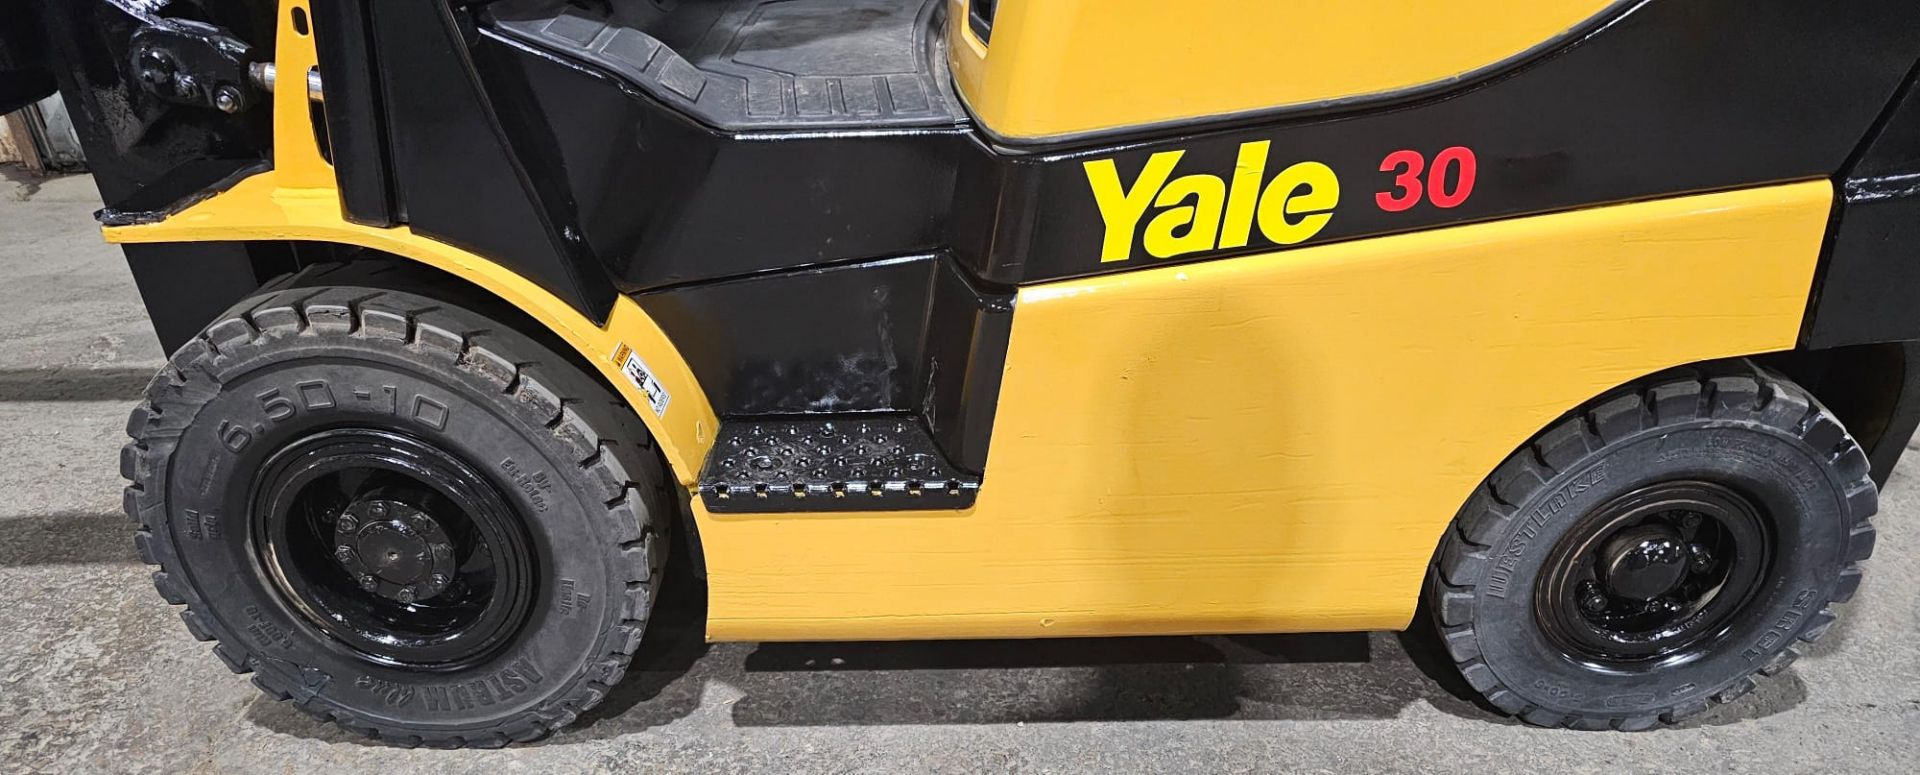 2016 Yale 3,000lbs capacity LPG (Propane) OUTDOOR Forklift 3-Stage sideshift with LOW HOURS tires - Image 3 of 7